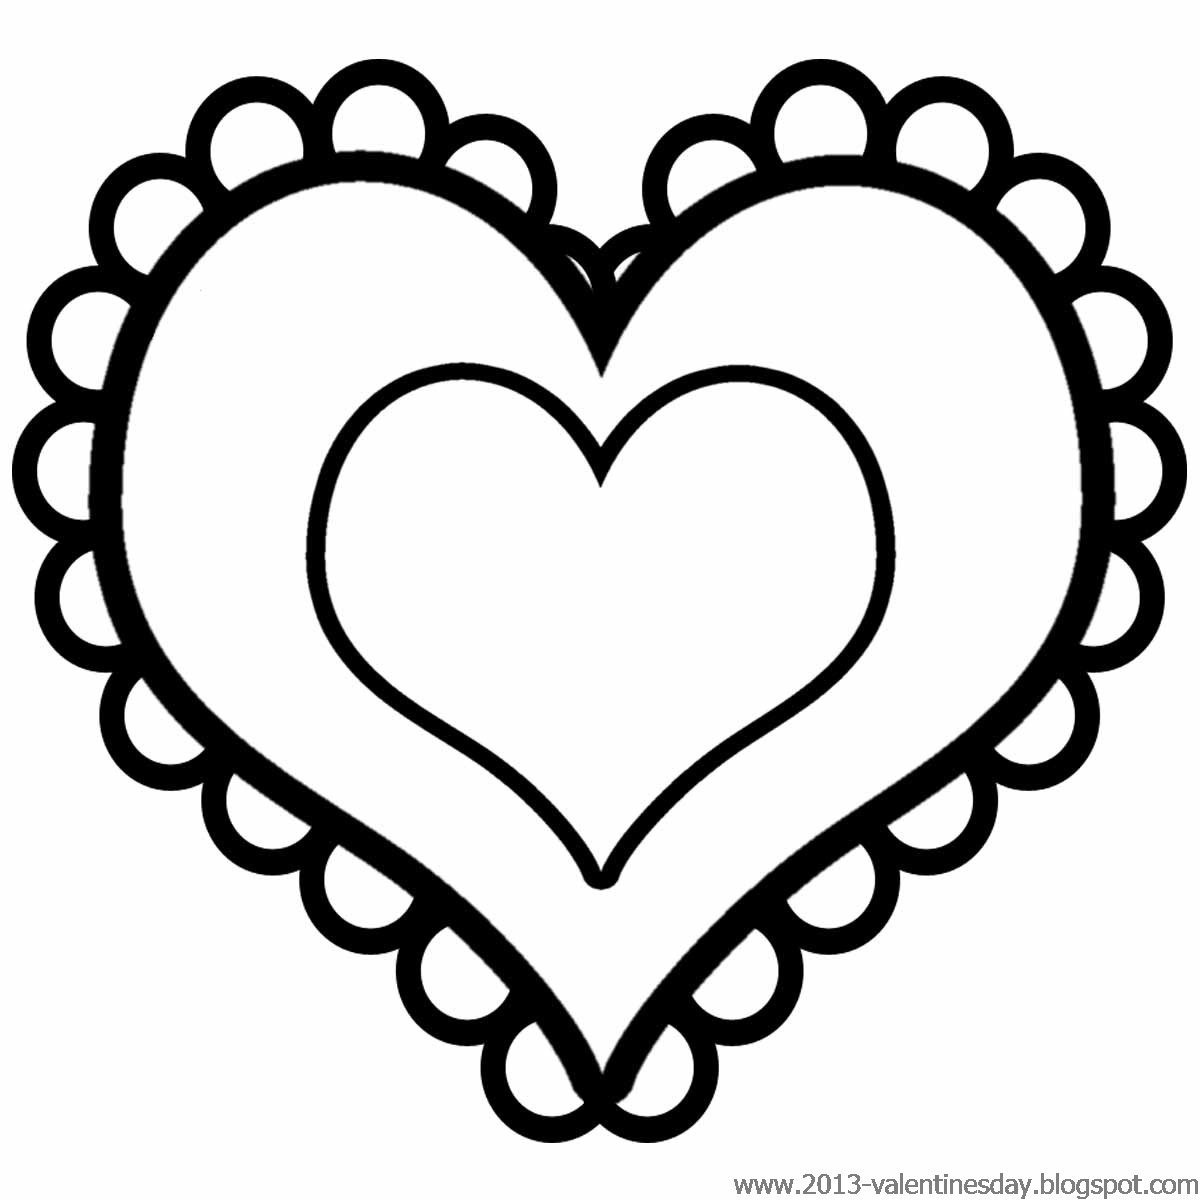 Heart black and white. 4 clipart object